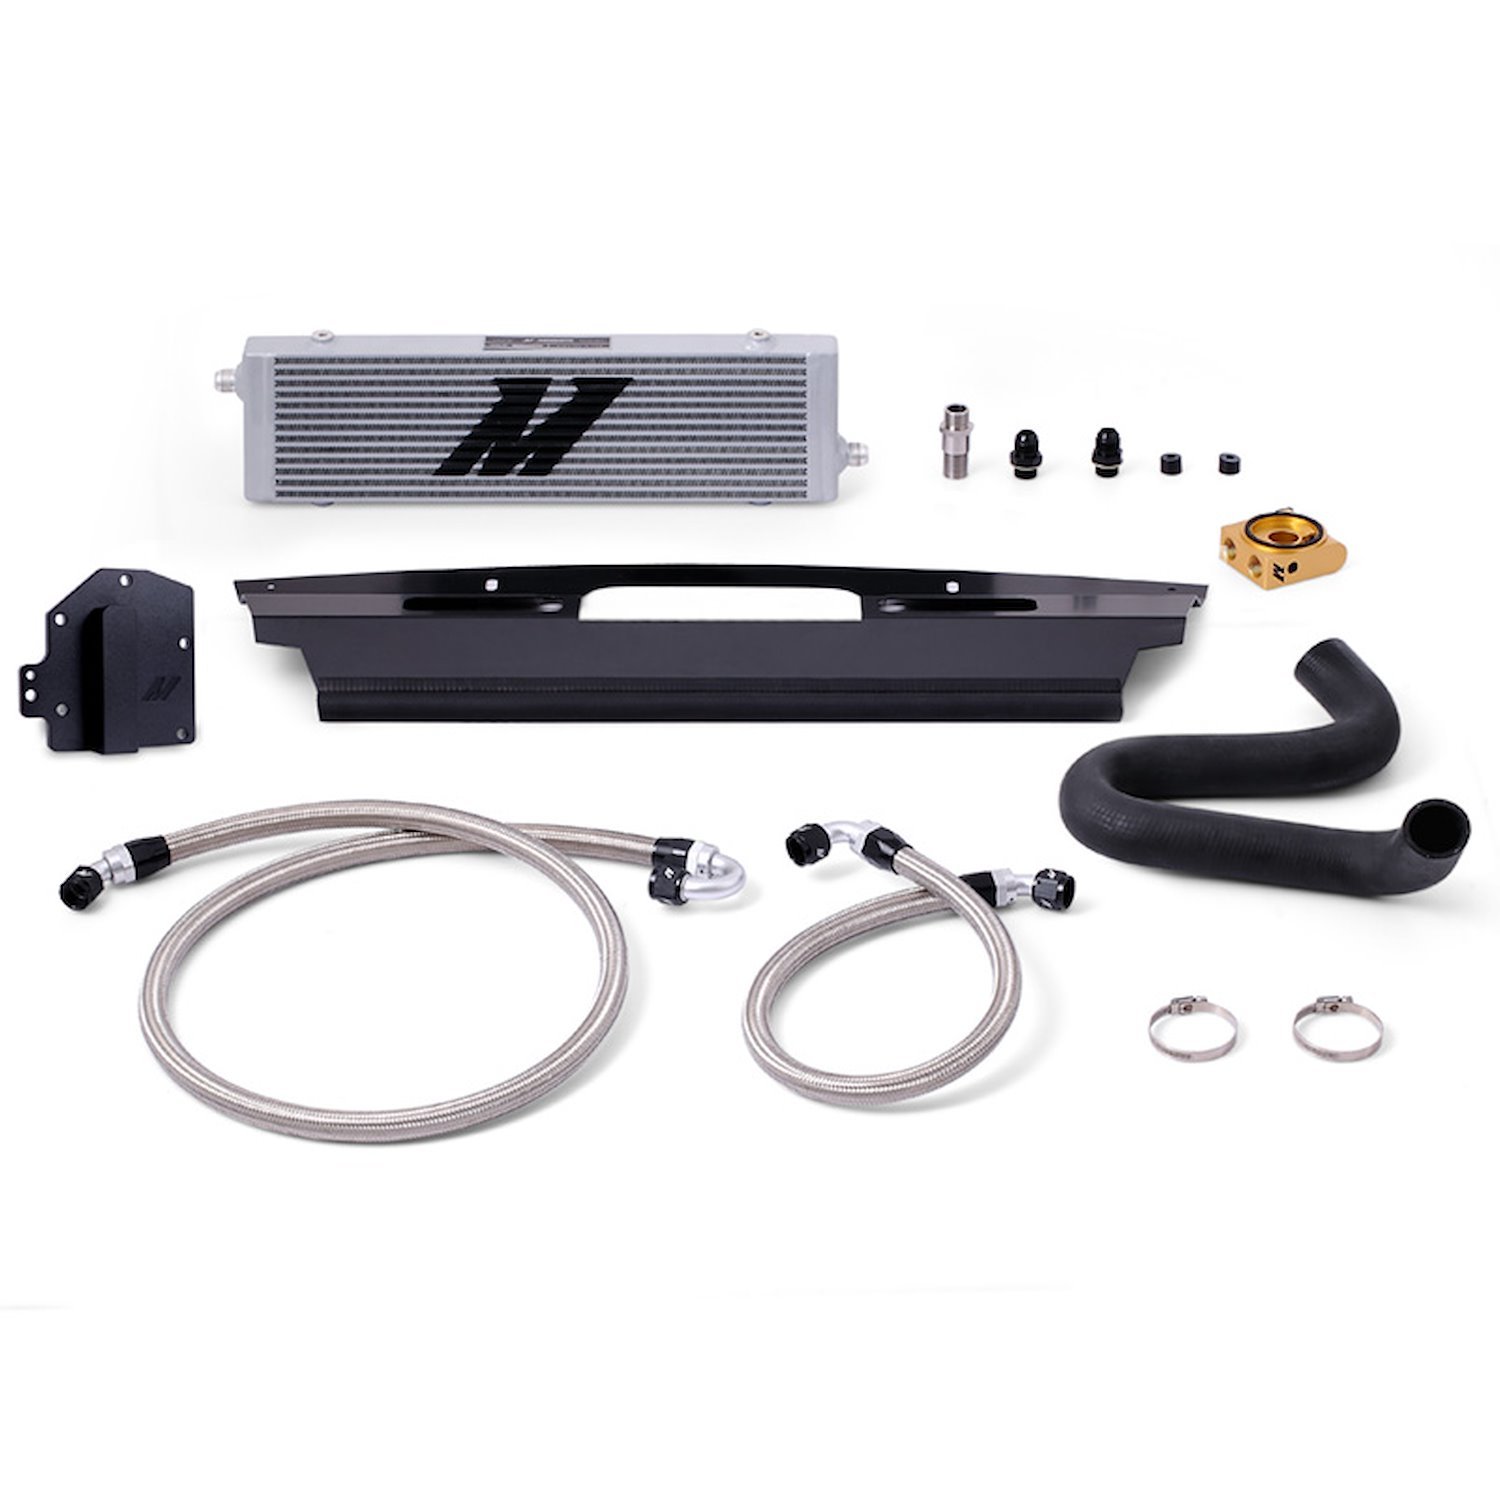 MMOC-MUS8-15TRHD Oil Cooler Kit, fits Ford Mustang GT Right-Hand Drive 2015-2017